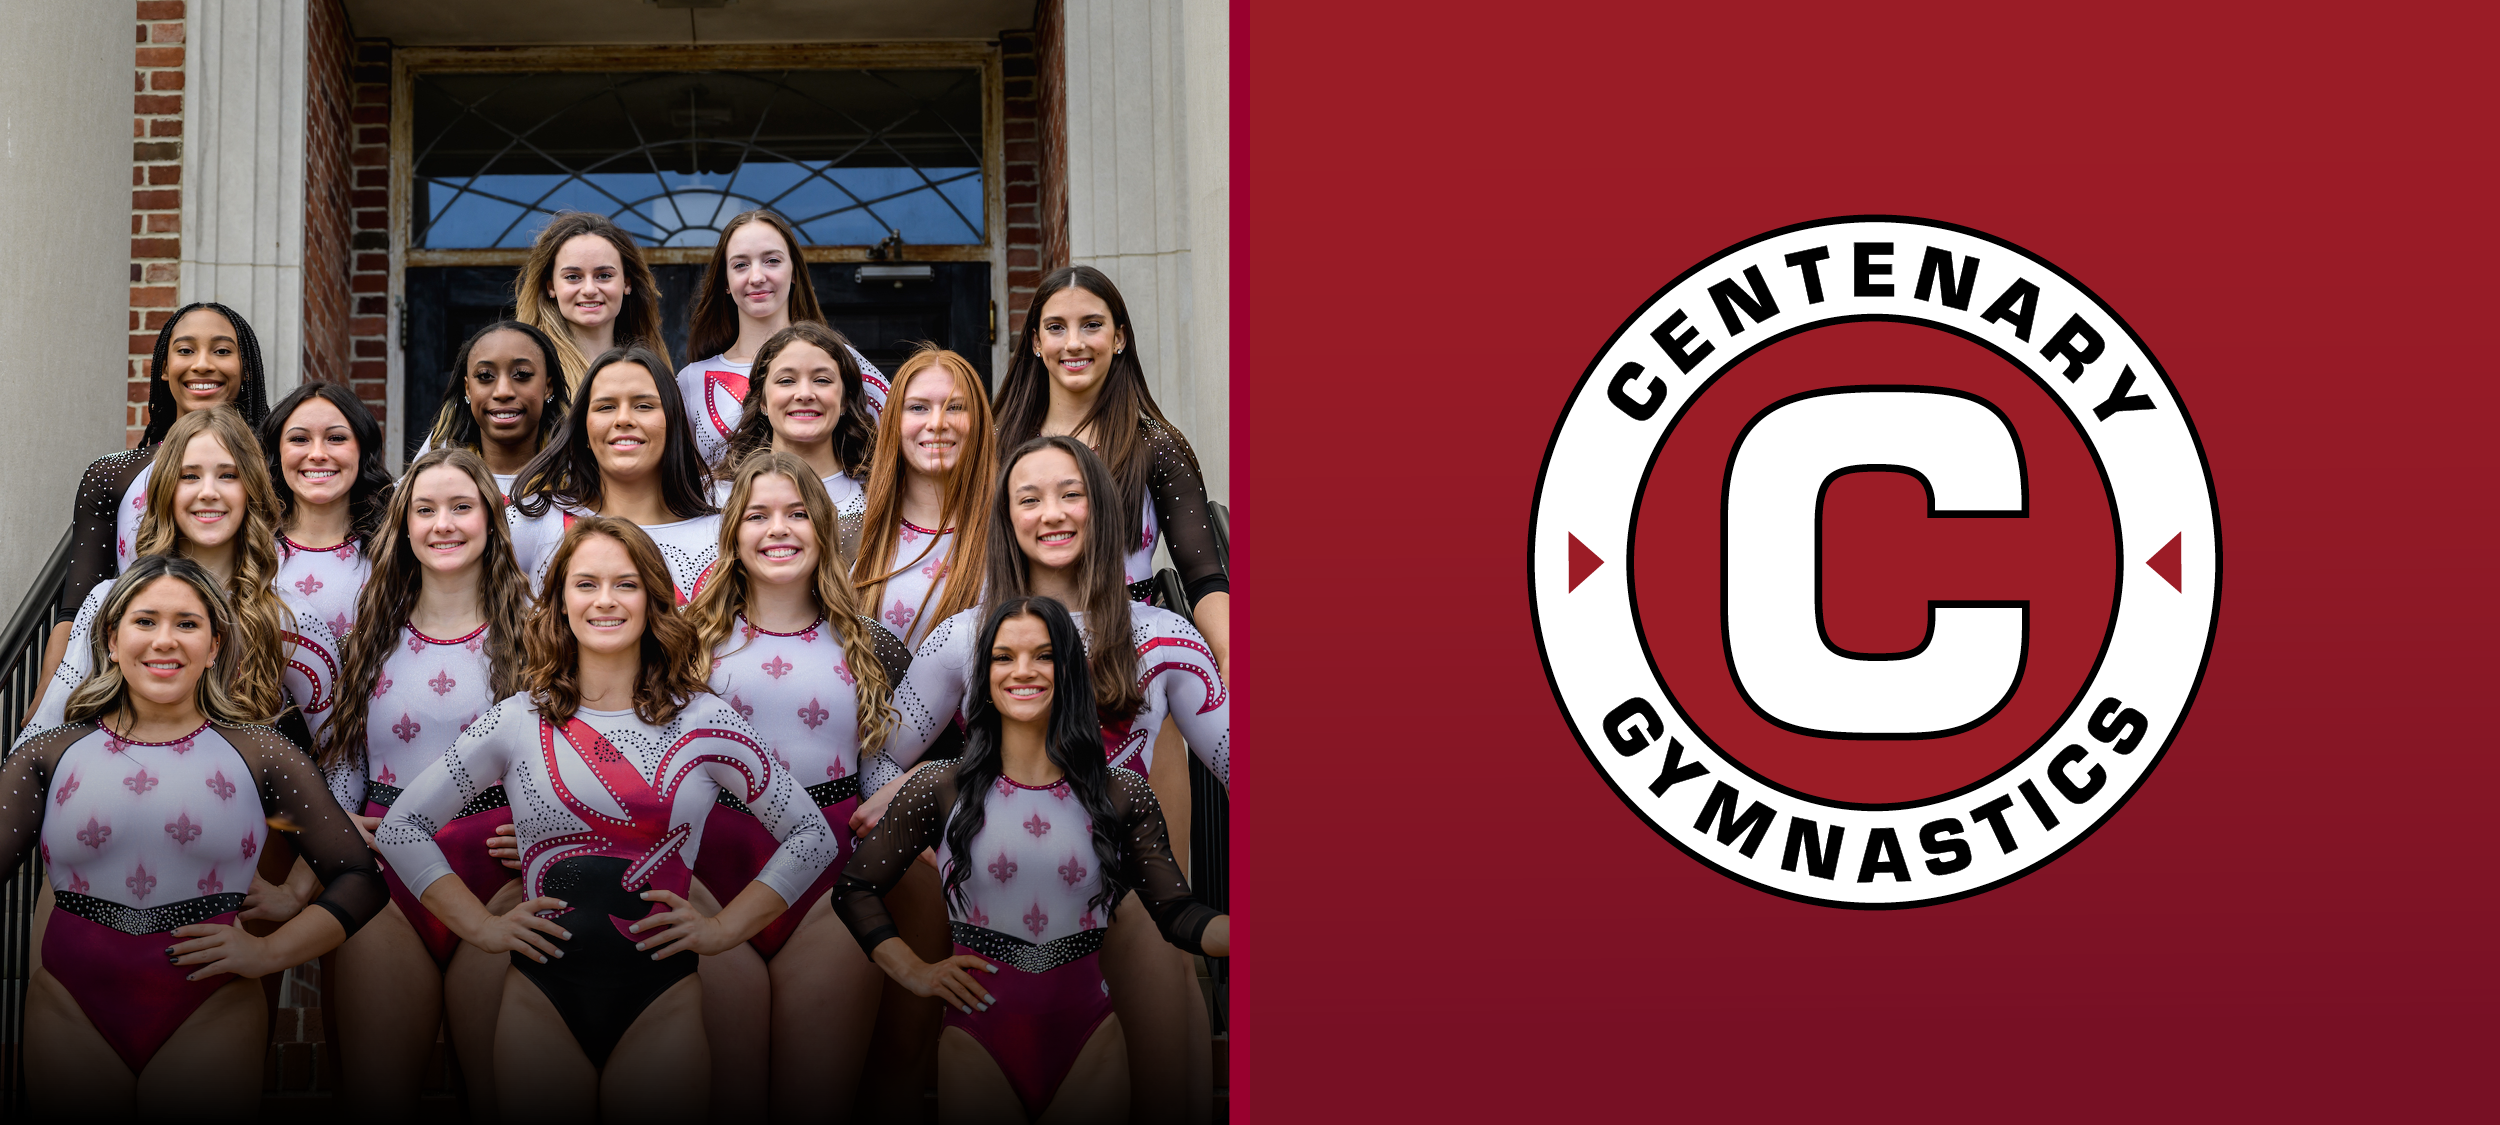 The Ladies earned their highest score in a season-opening meet in 15 years on Saturday with a 188.30.